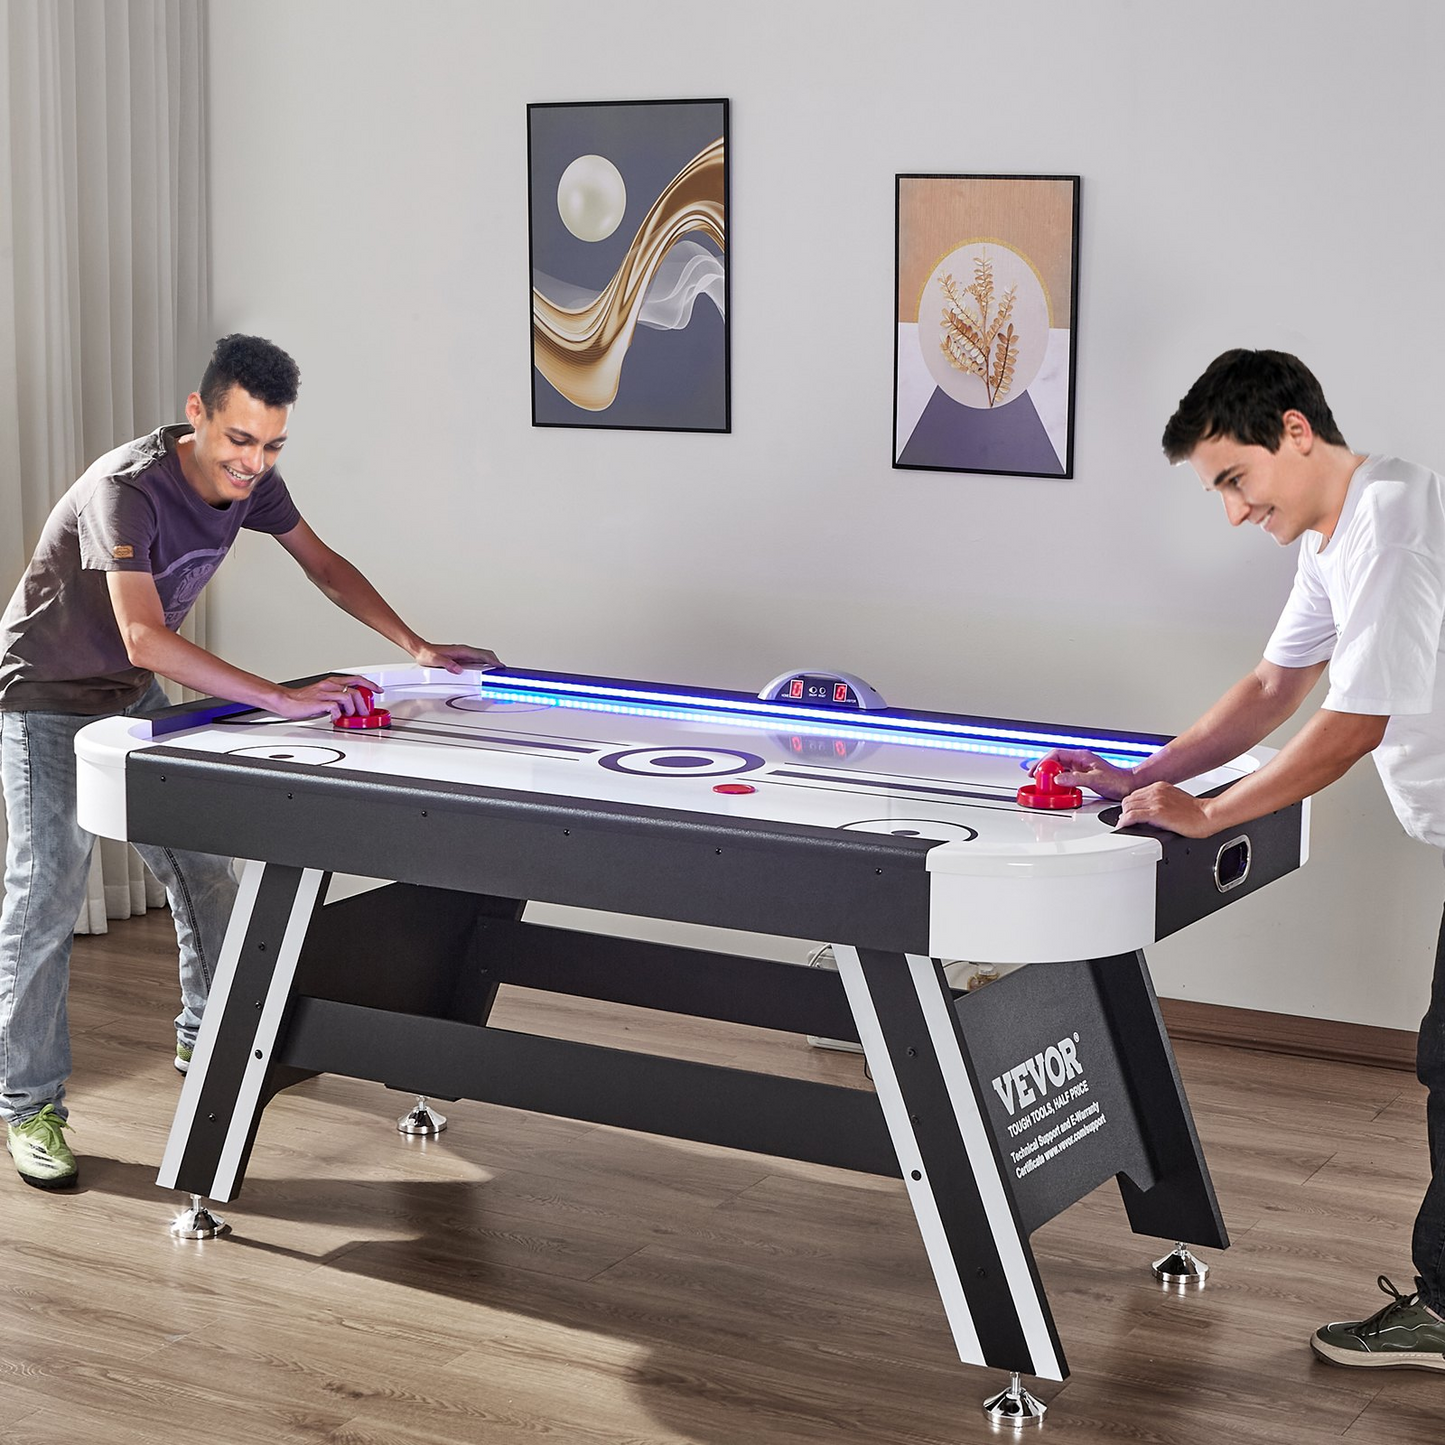 VEVOR Air-Powered Hockey Table, 72" Indoor Hockey Table for Kids and Adults, LED Sports Hockey Game with 2 Pucks, 2 Pushers, and Electronic Score System, Arcade Gaming Set for Game Room Family Home, Goodies N Stuff